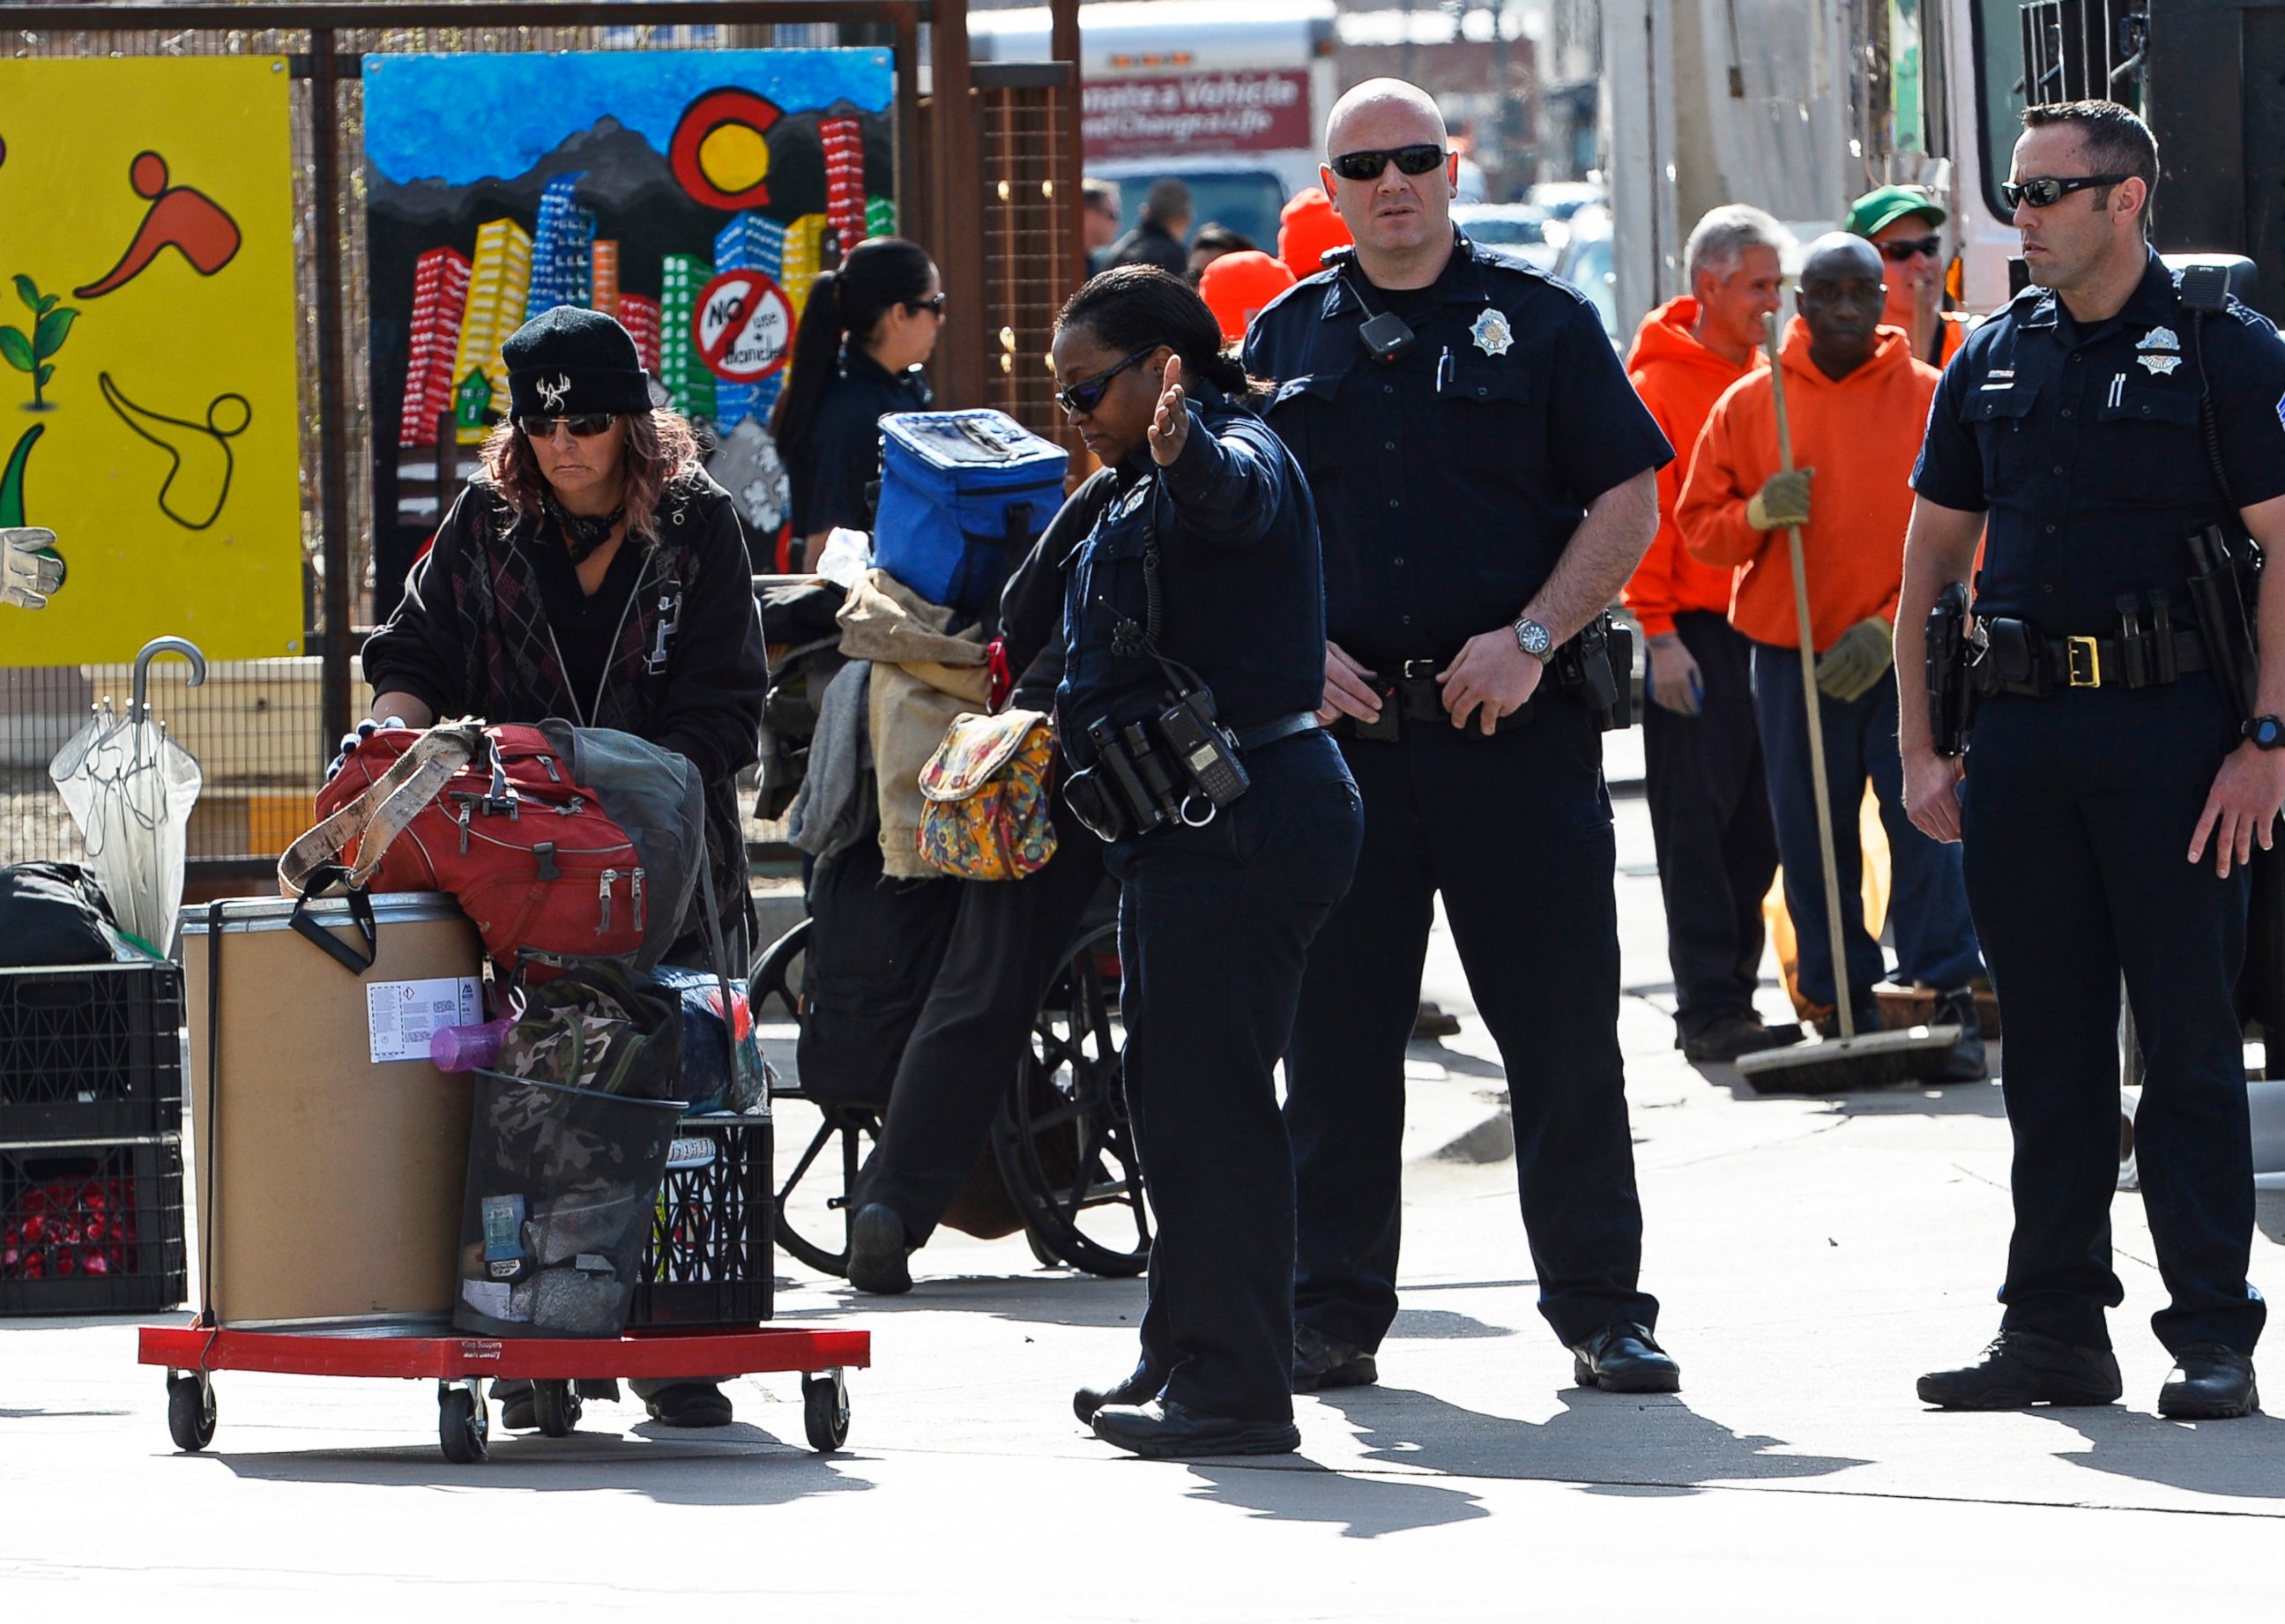 PHOTO: Homeless people remove their belongings as Denver Police and Sheriff deputies oversee their progress and enforce the law at the intersections of Broadway and Park Ave West in Denver, Colorado, March 8, 2016 in Denver, Colorado. 